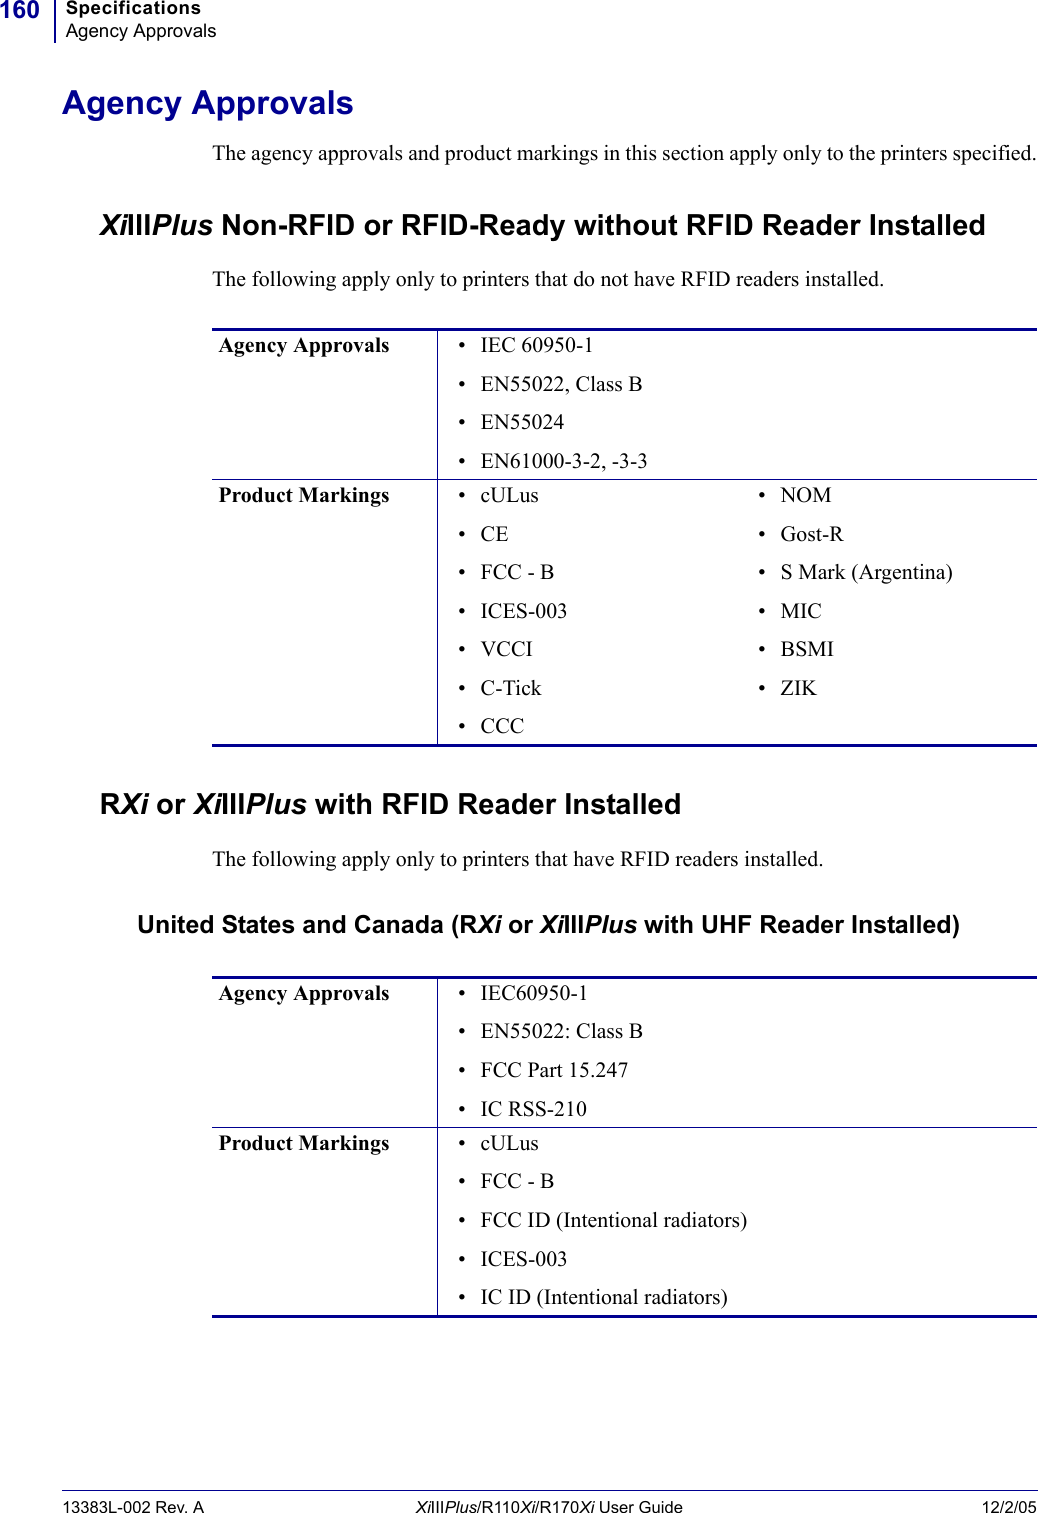 SpecificationsAgency Approvals16013383L-002 Rev. A XiIIIPlus/R110Xi/R170Xi User Guide 12/2/05Agency ApprovalsThe agency approvals and product markings in this section apply only to the printers specified.XiIIIPlus Non-RFID or RFID-Ready without RFID Reader InstalledThe following apply only to printers that do not have RFID readers installed.RXi or XiIIIPlus with RFID Reader InstalledThe following apply only to printers that have RFID readers installed.United States and Canada (RXi or XiIIIPlus with UHF Reader Installed)Agency Approvals • IEC 60950-1• EN55022, Class B• EN55024• EN61000-3-2, -3-3Product Markings •cULus•CE• FCC - B•ICES-003• VCCI•C-Tick•CCC•NOM•Gost-R•S Mark (Argentina)•MIC•BSMI•ZIKAgency Approvals • IEC60950-1• EN55022: Class B• FCC Part 15.247•IC RSS-210Product Markings •cULus• FCC - B• FCC ID (Intentional radiators)•ICES-003• IC ID (Intentional radiators)